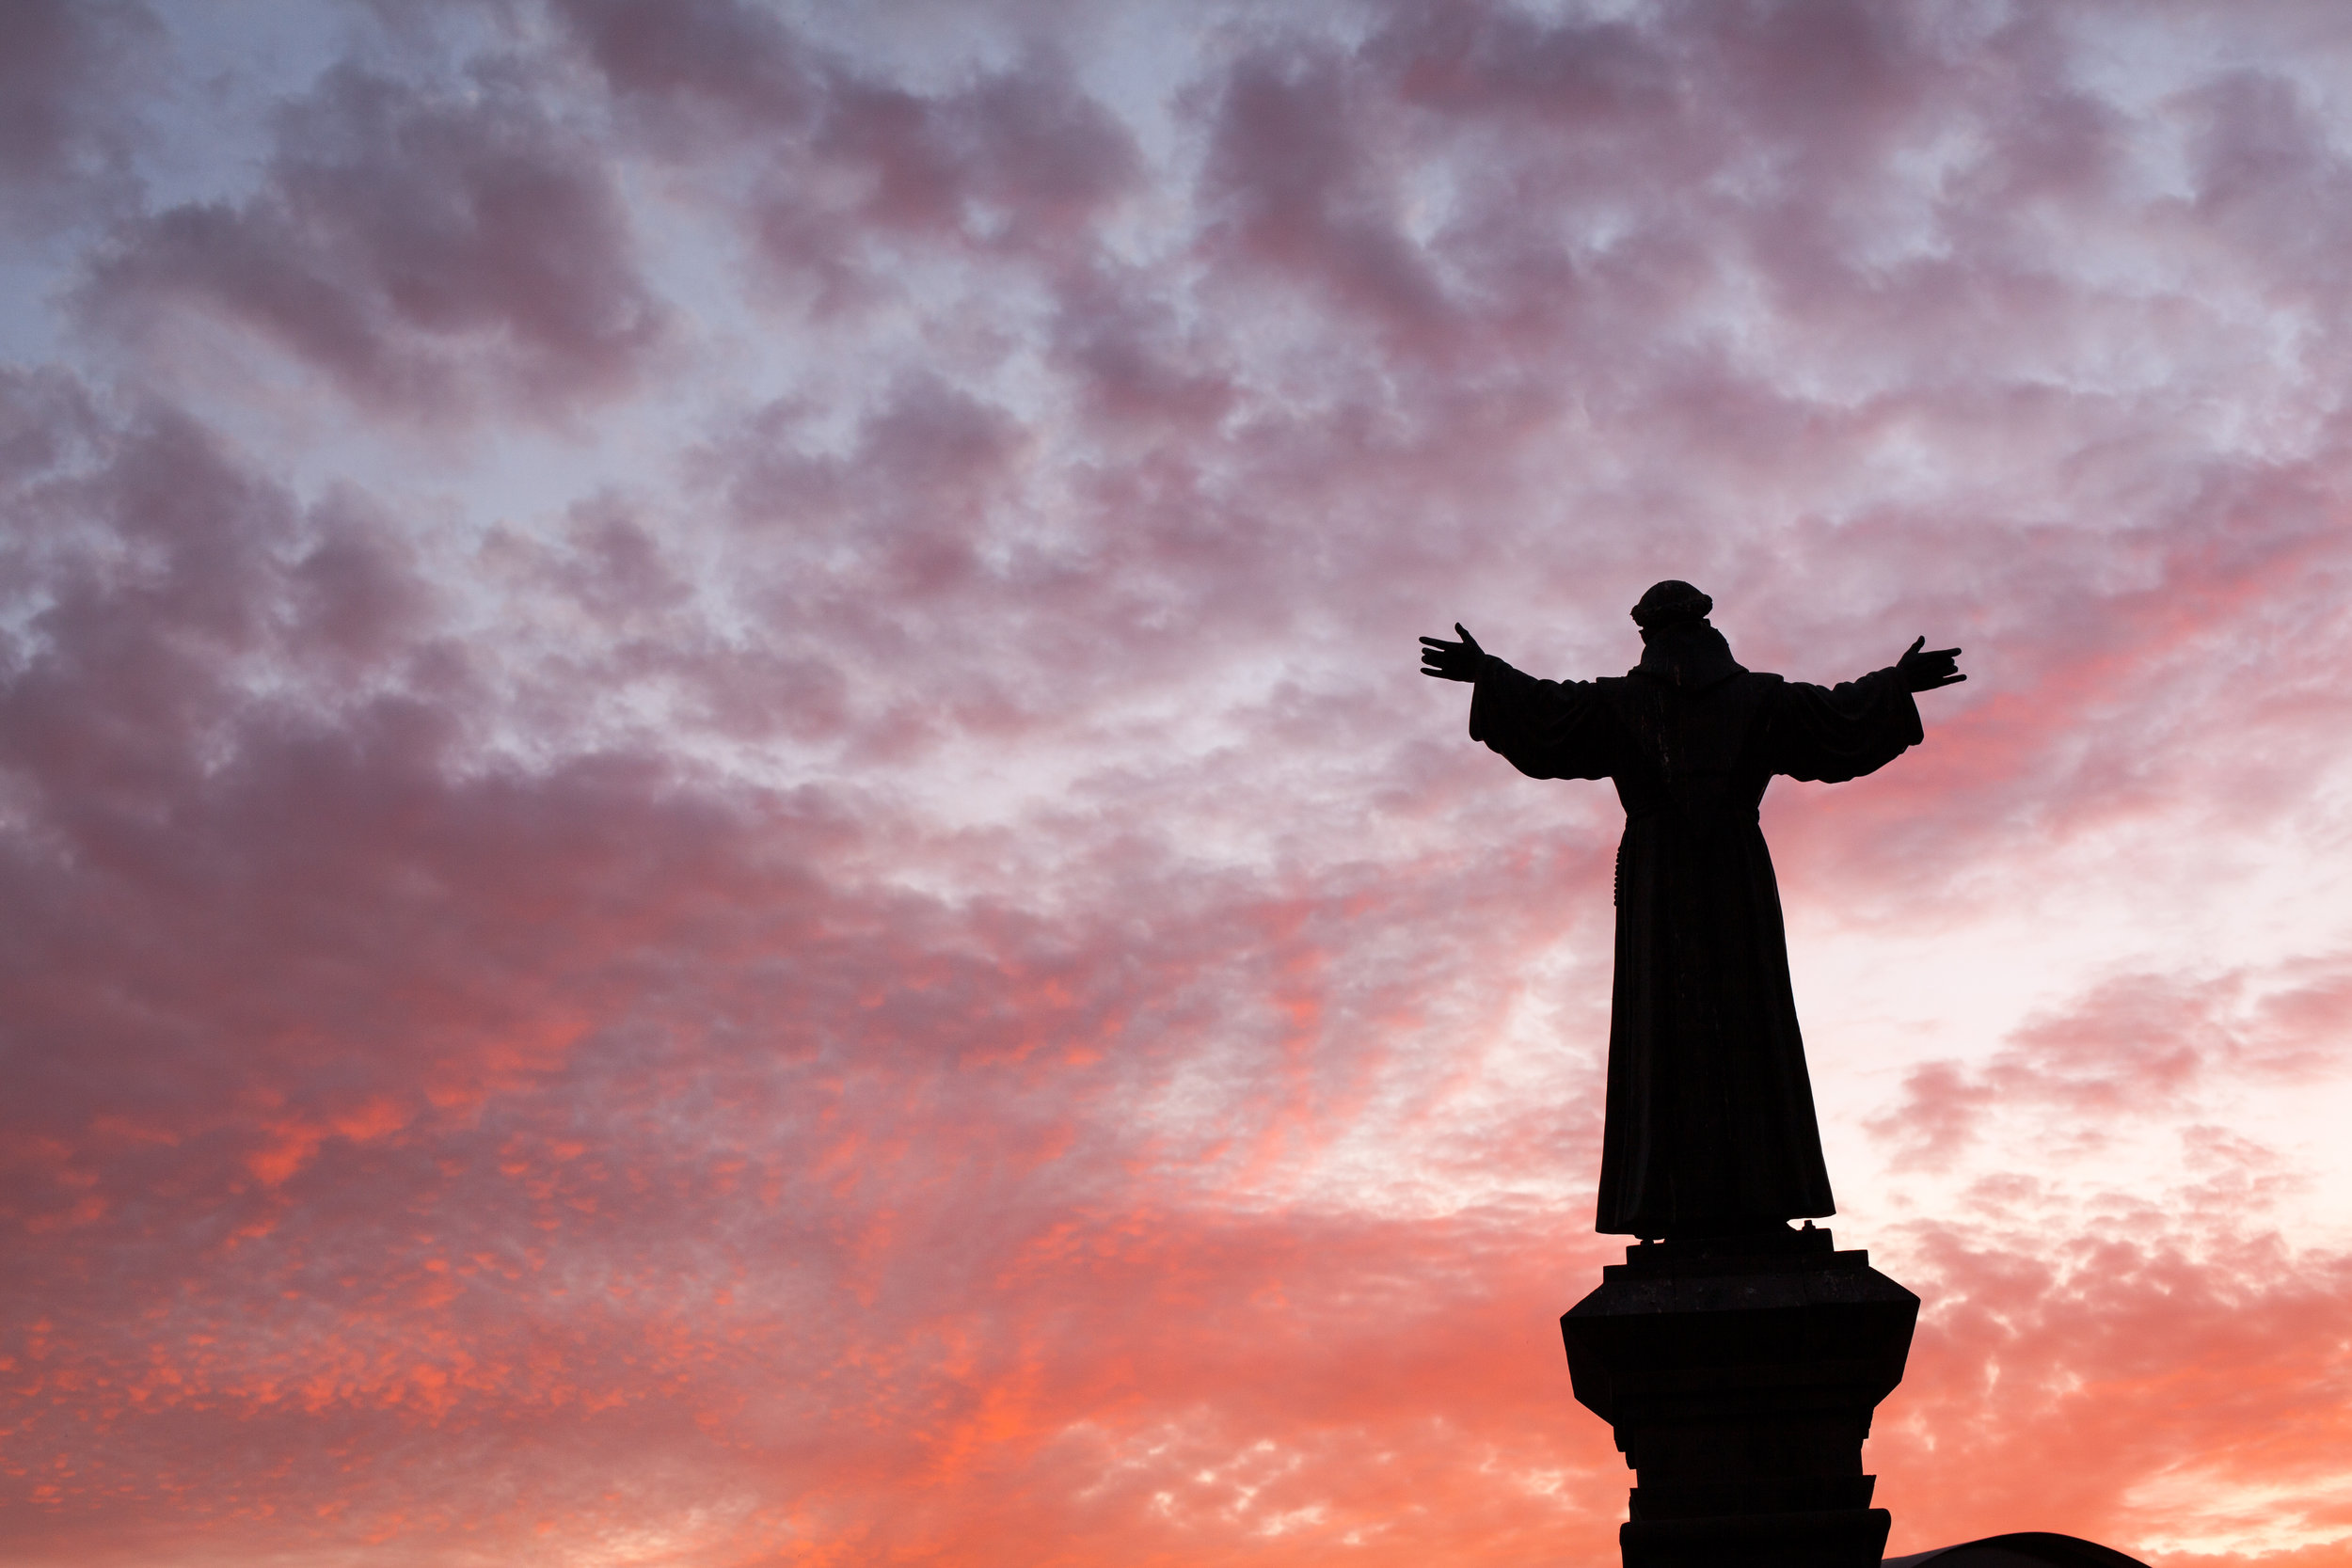 Negative space can add drama to an image such as this religious statue against a blood red sunset in Arequipa, Peru.